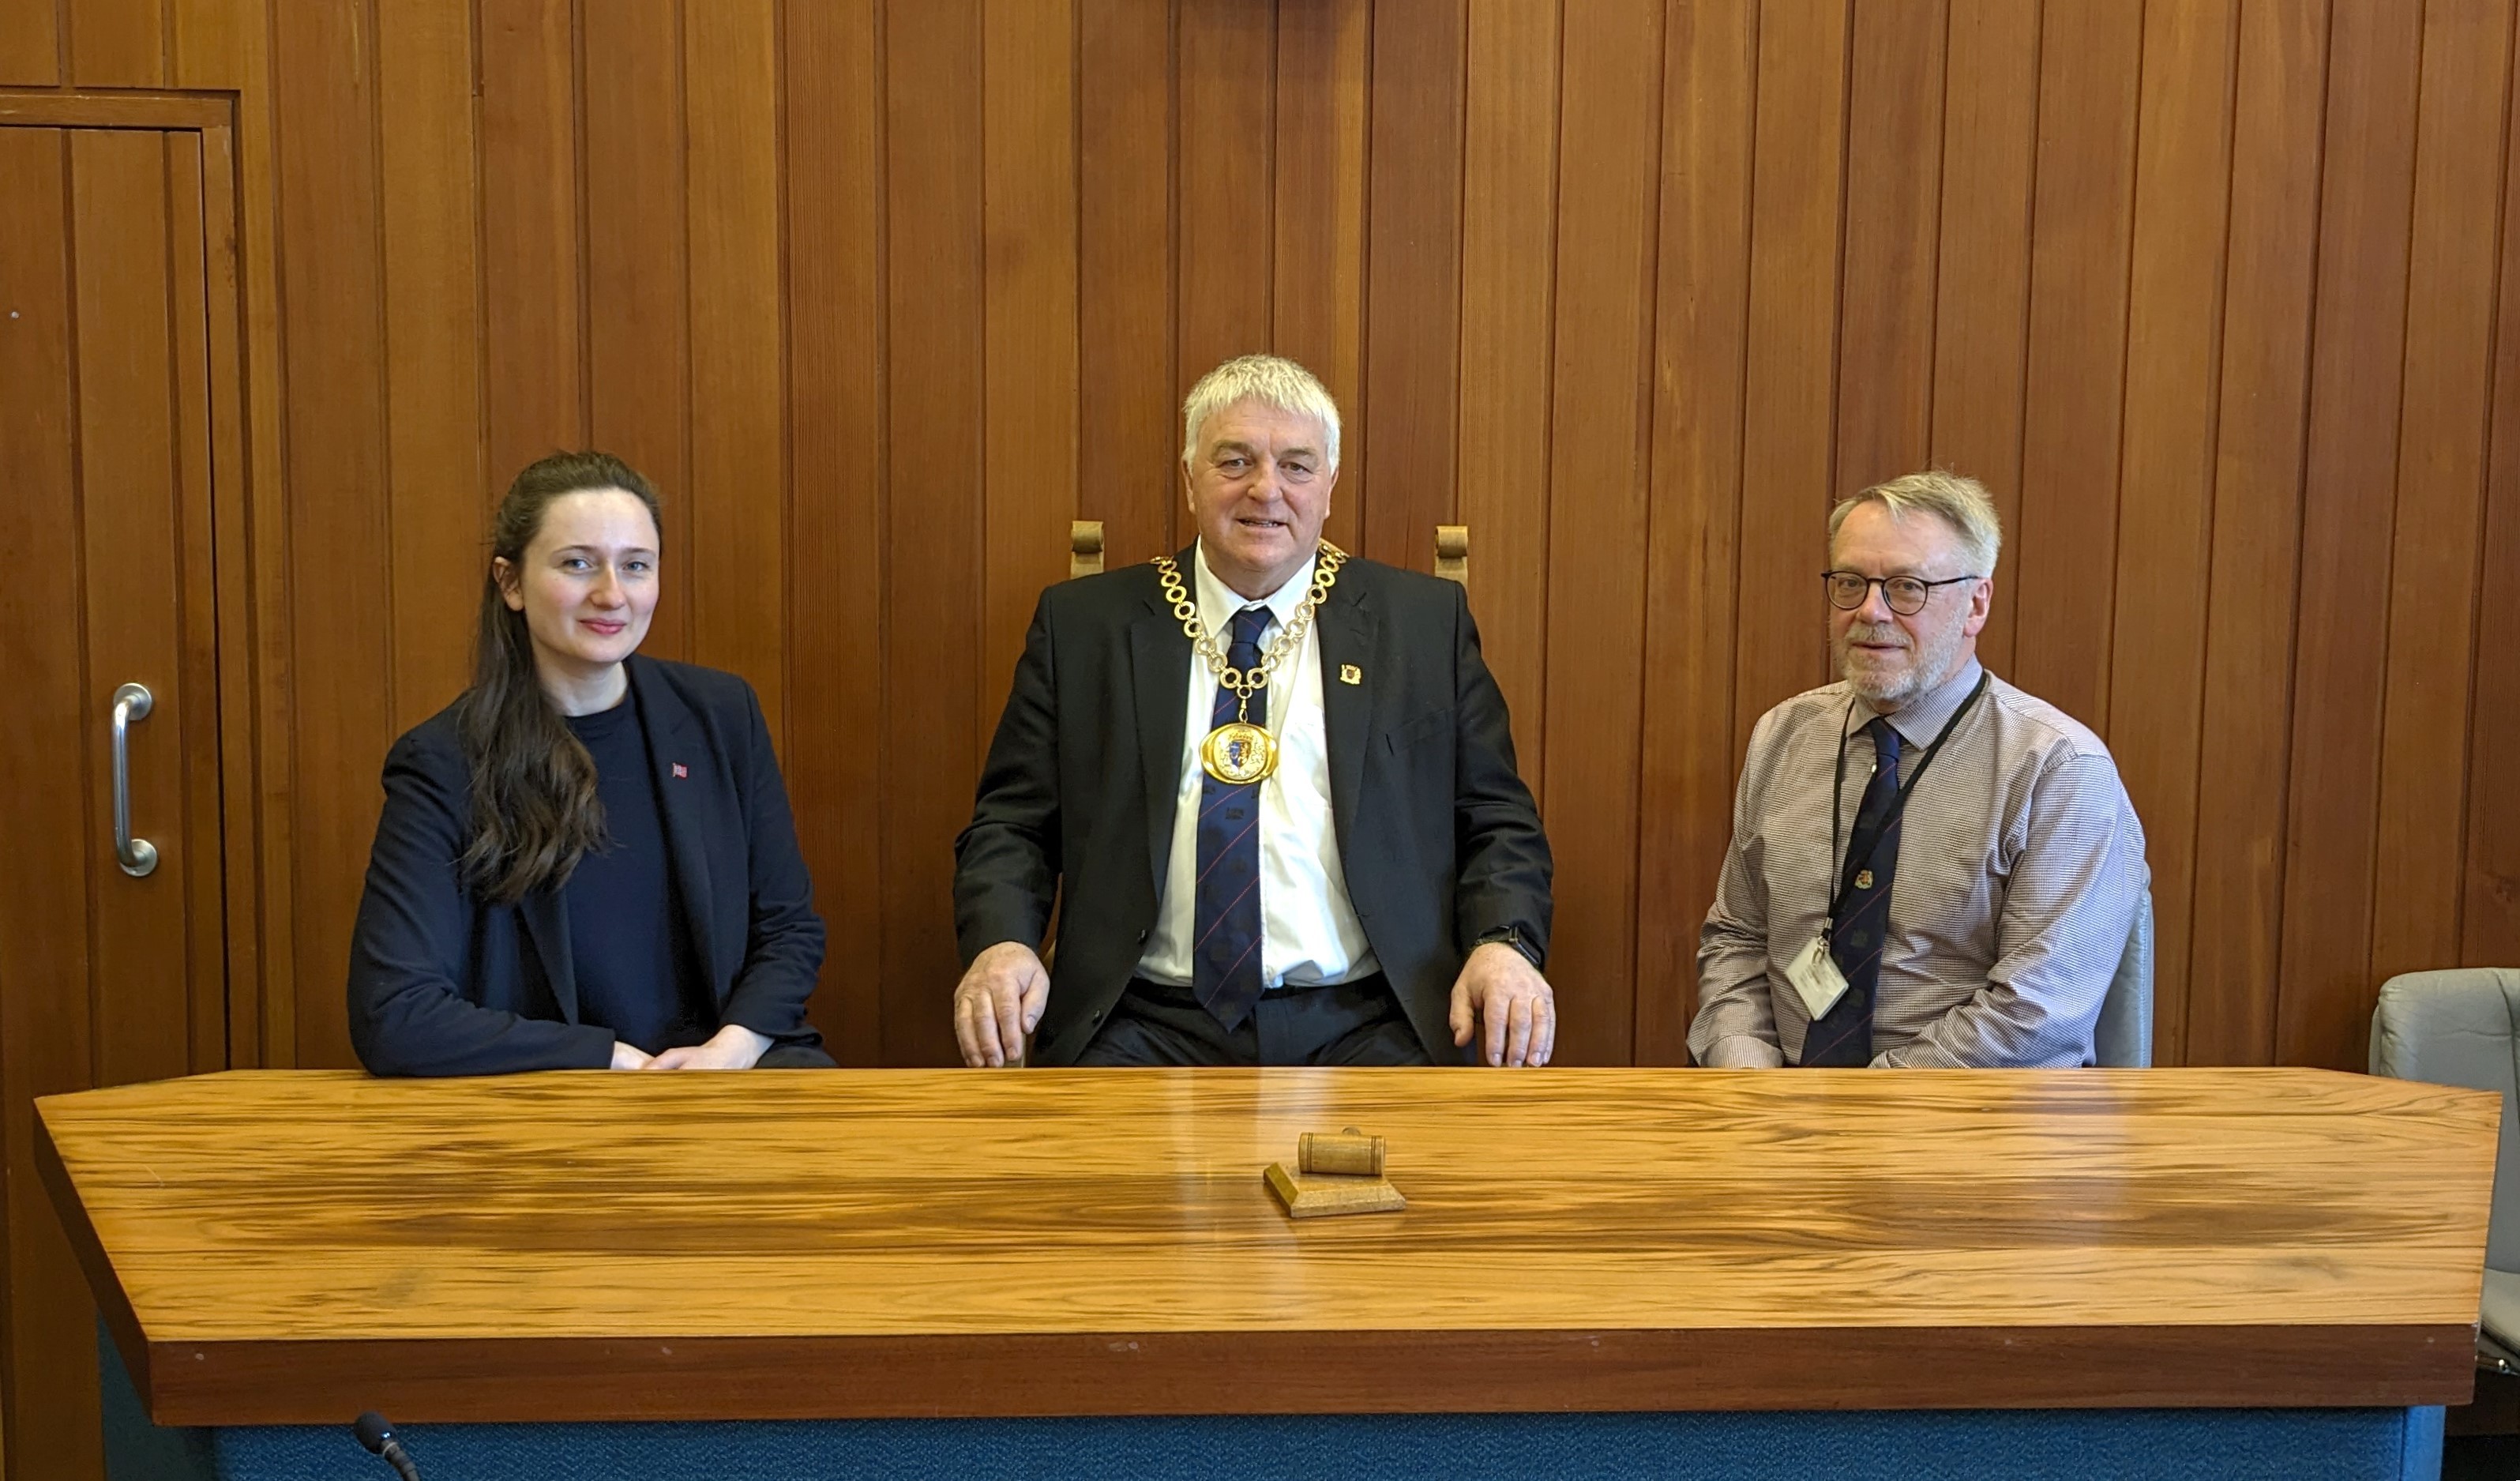 The new leadership team at Orkney Islands Council. From left: political leader Heather Woodbridge, convener Graham Bevan, and depute leader Sandy Cowie 